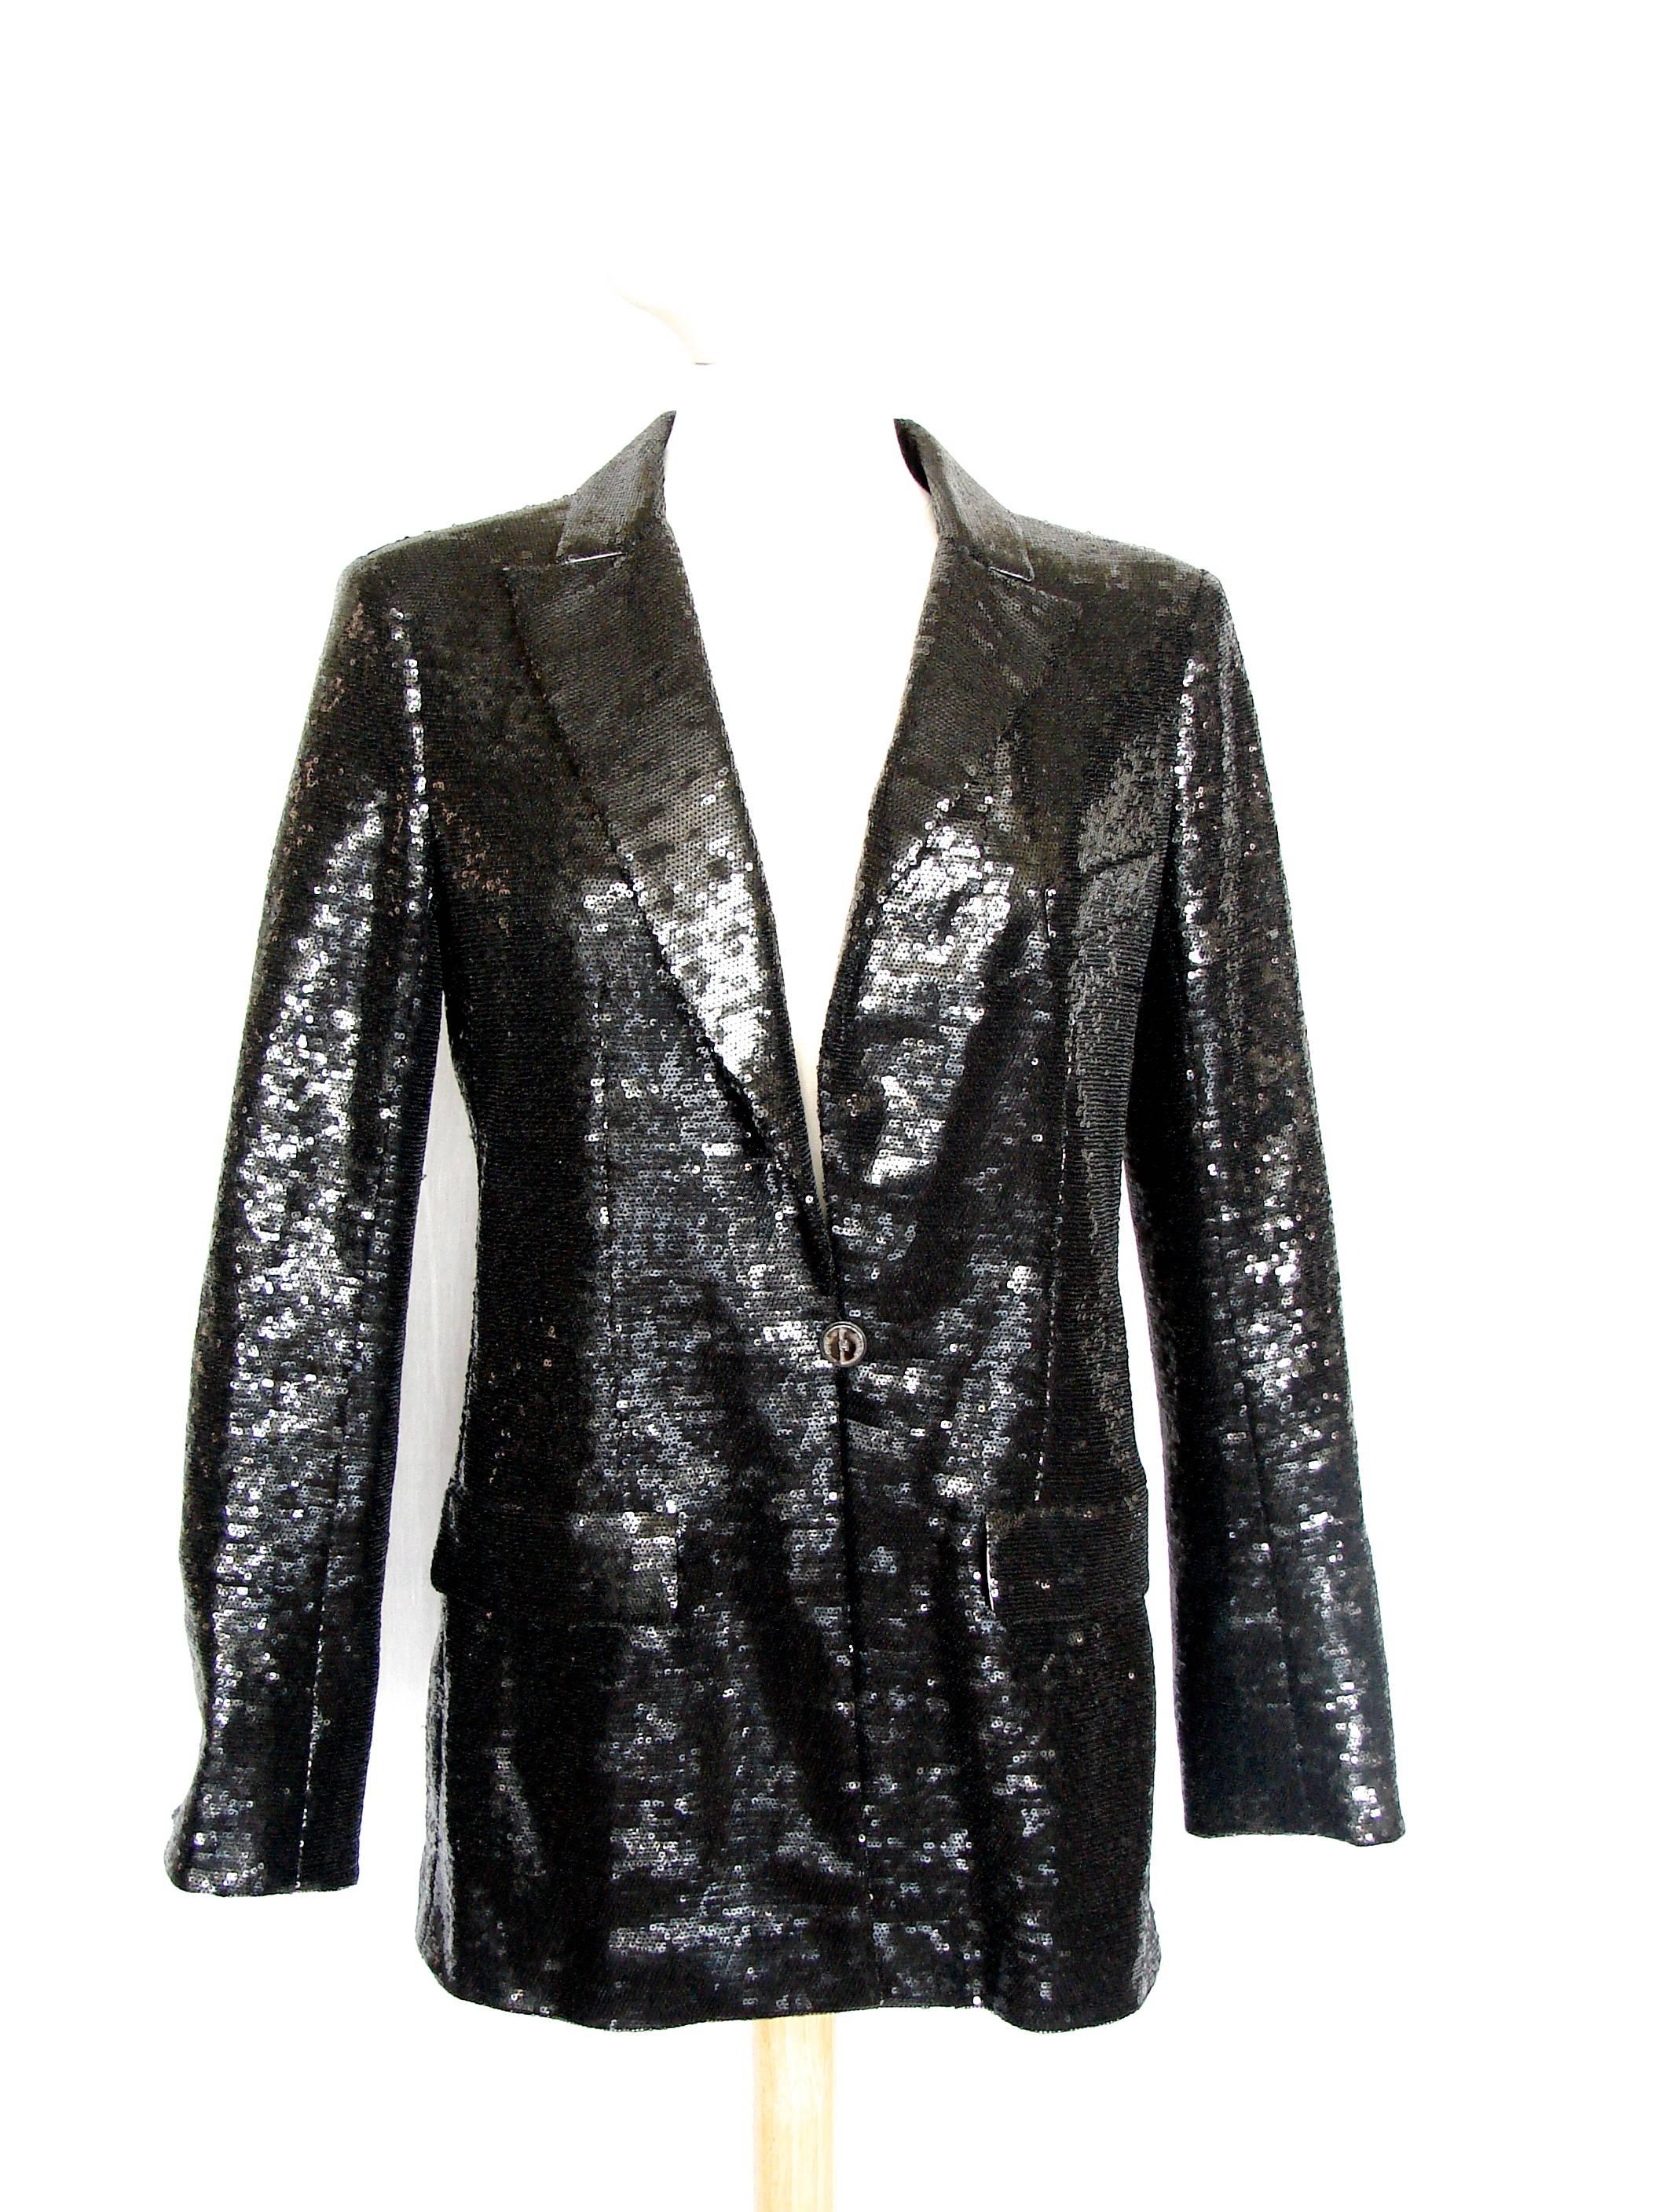 Chanel Evening Jacket Black Sequins with Contrast Cuffs and Collar Sz 44 09C  In Excellent Condition In Port Saint Lucie, FL